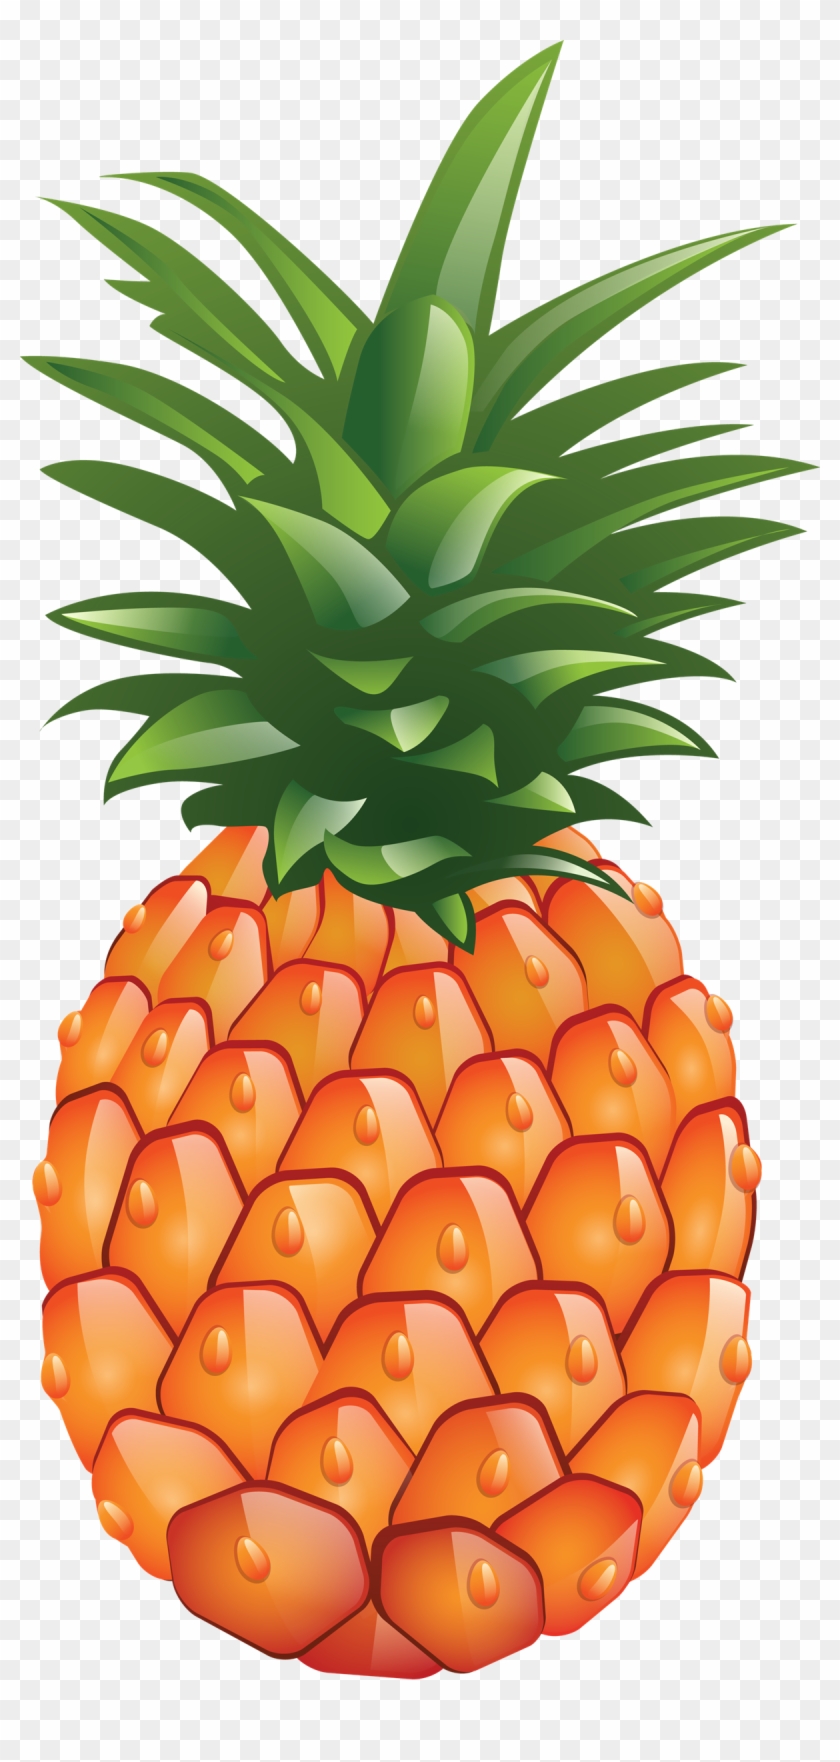 Pineapple Png Free Download - Portable Network Graphics #1115380